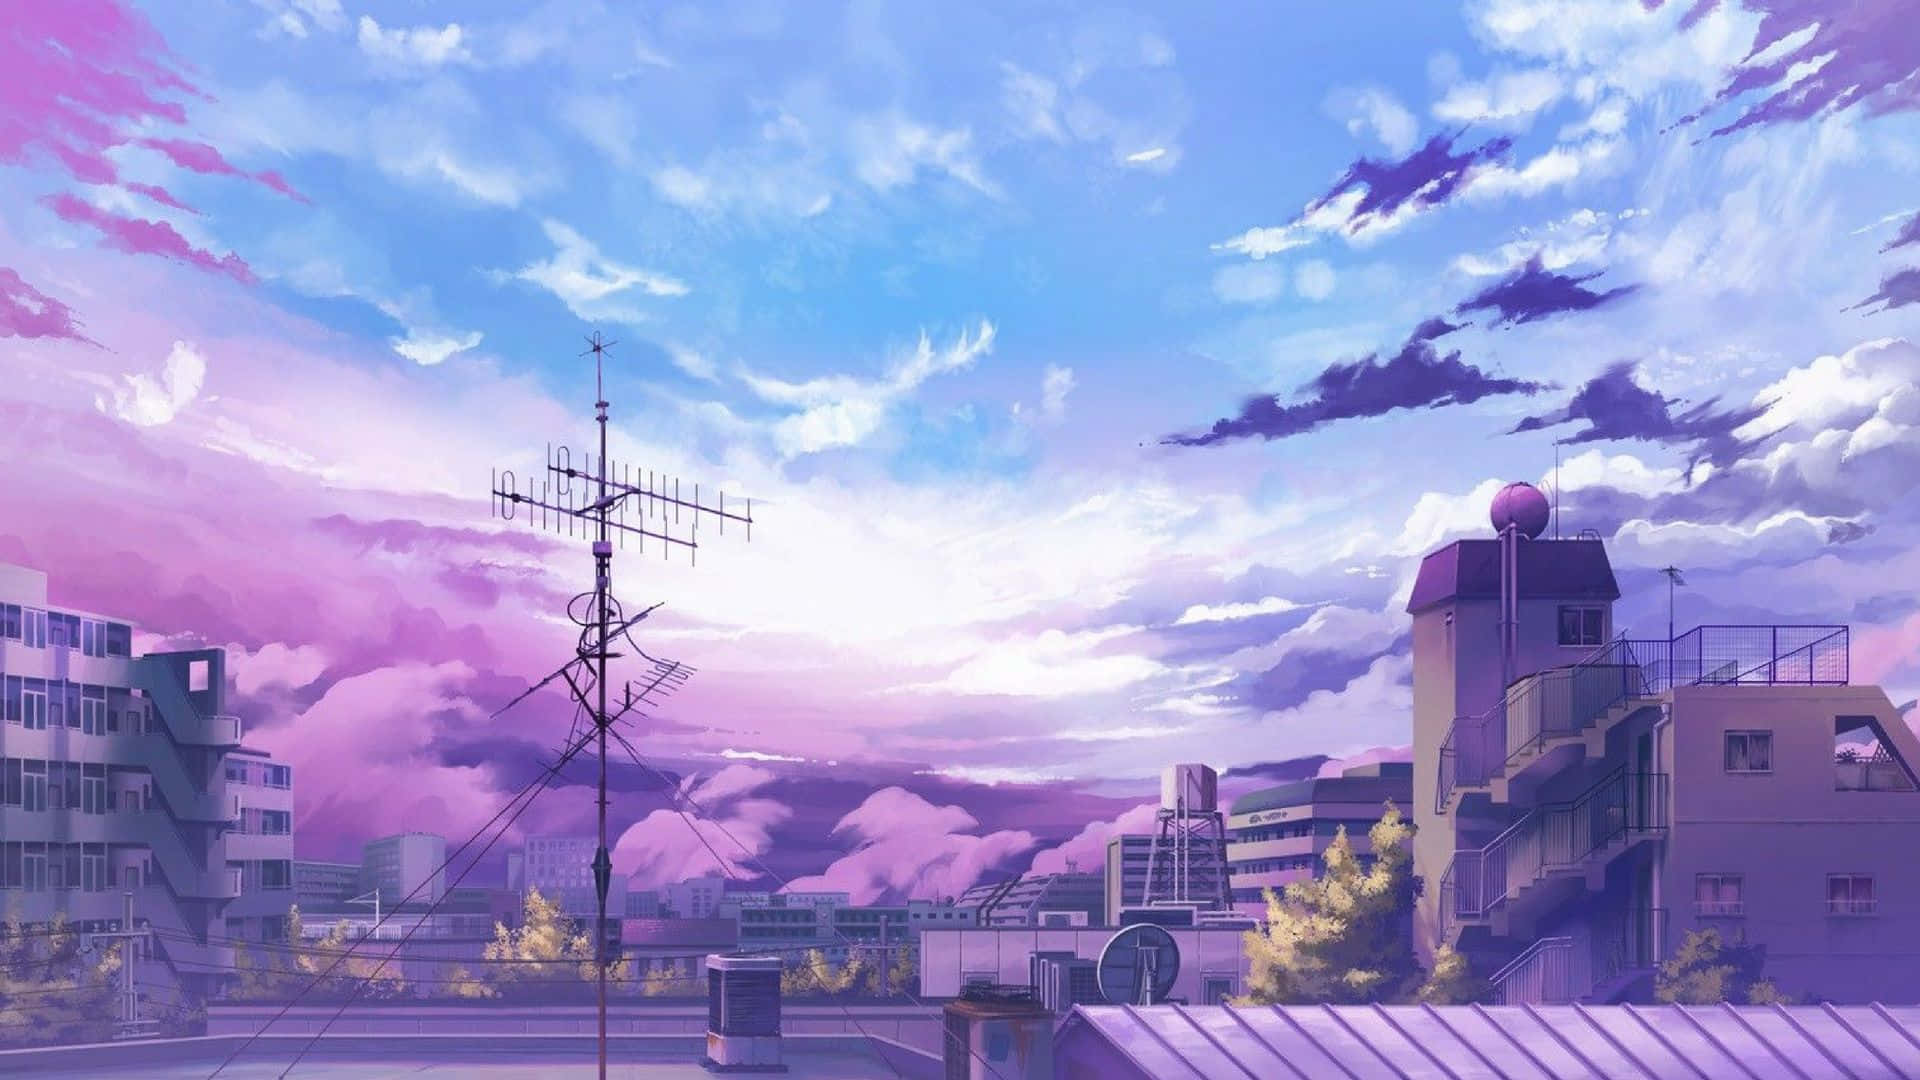 Aesthetic Anime Cityscape at Night